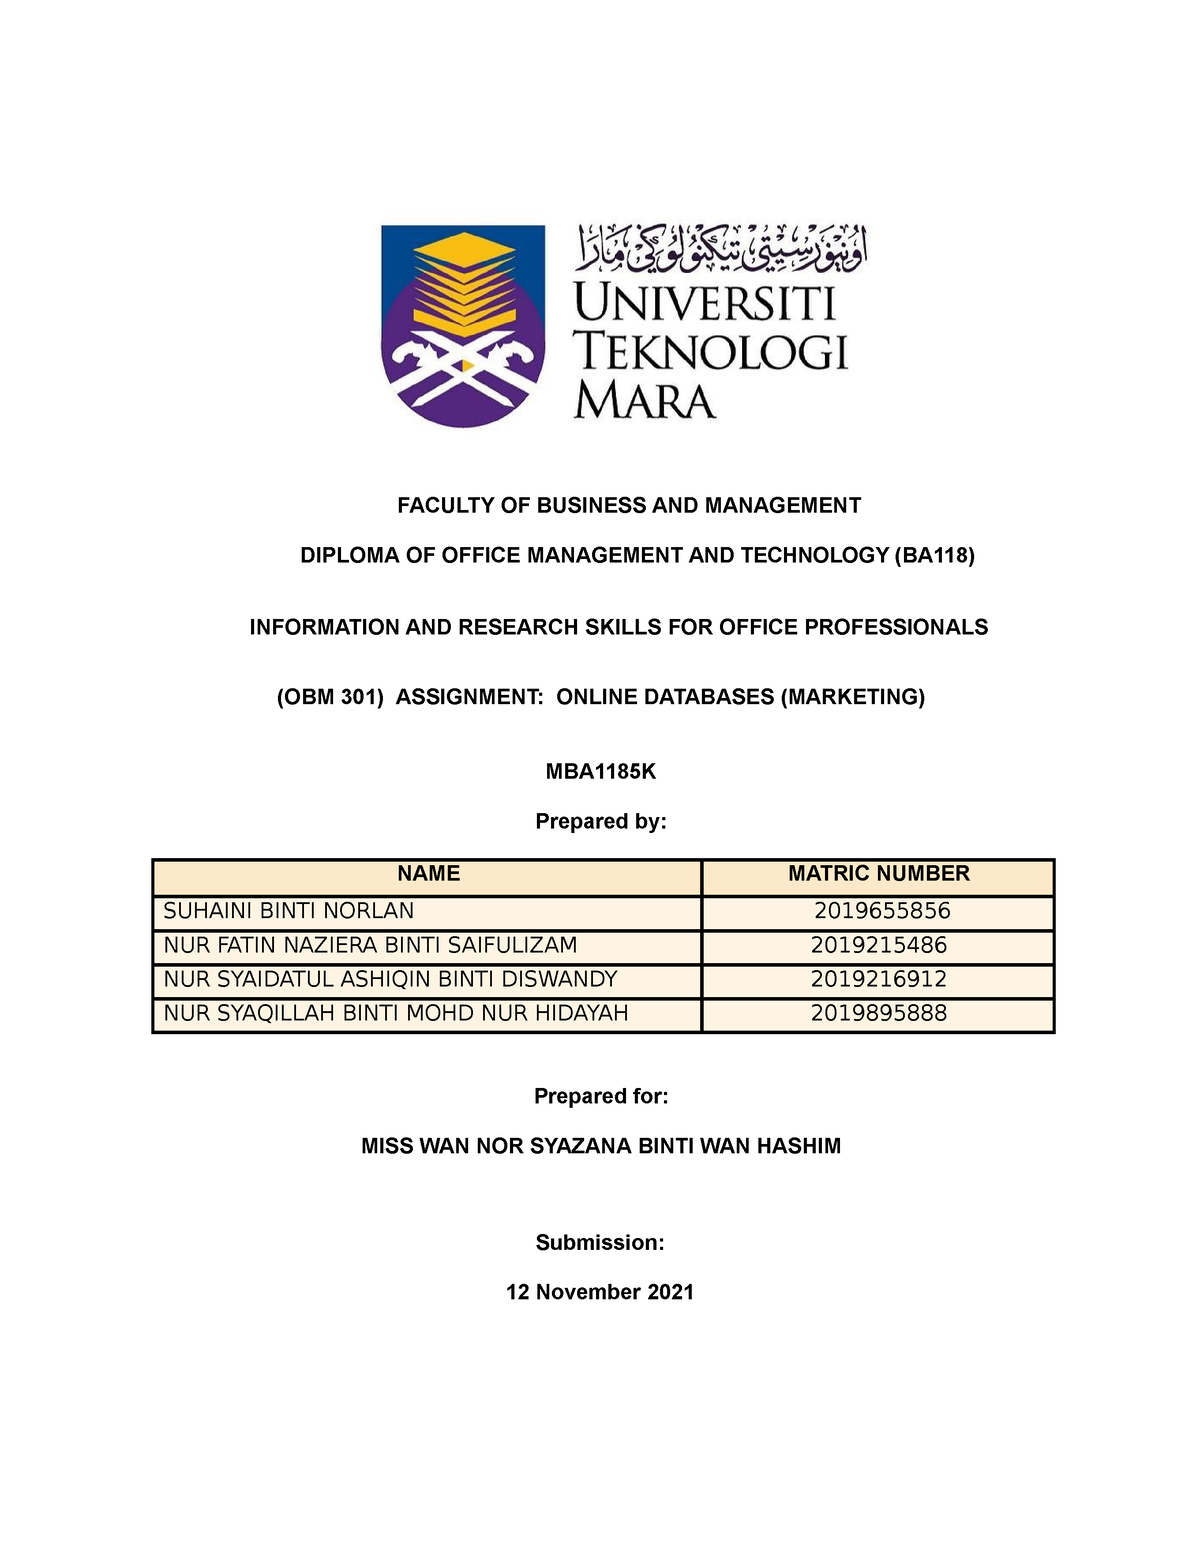 Online Database OBM301 FACULTY OF BUSINESS AND MANAGEMENT DIPLOMA OF